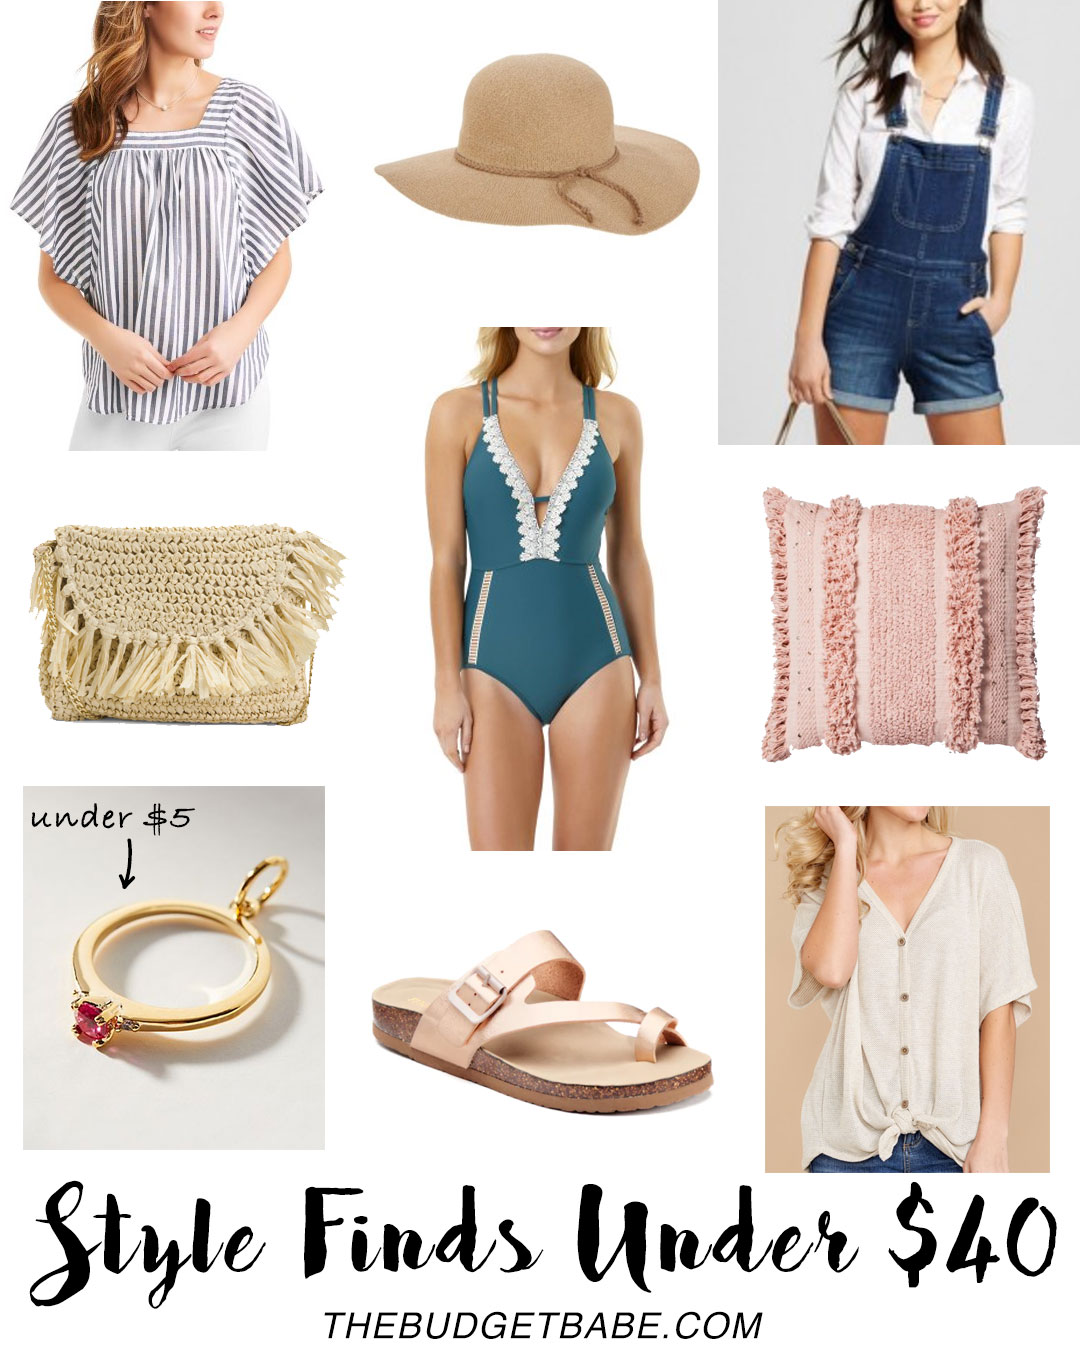 Style Finds Under $40 - now this is a budget fashion blog for real!